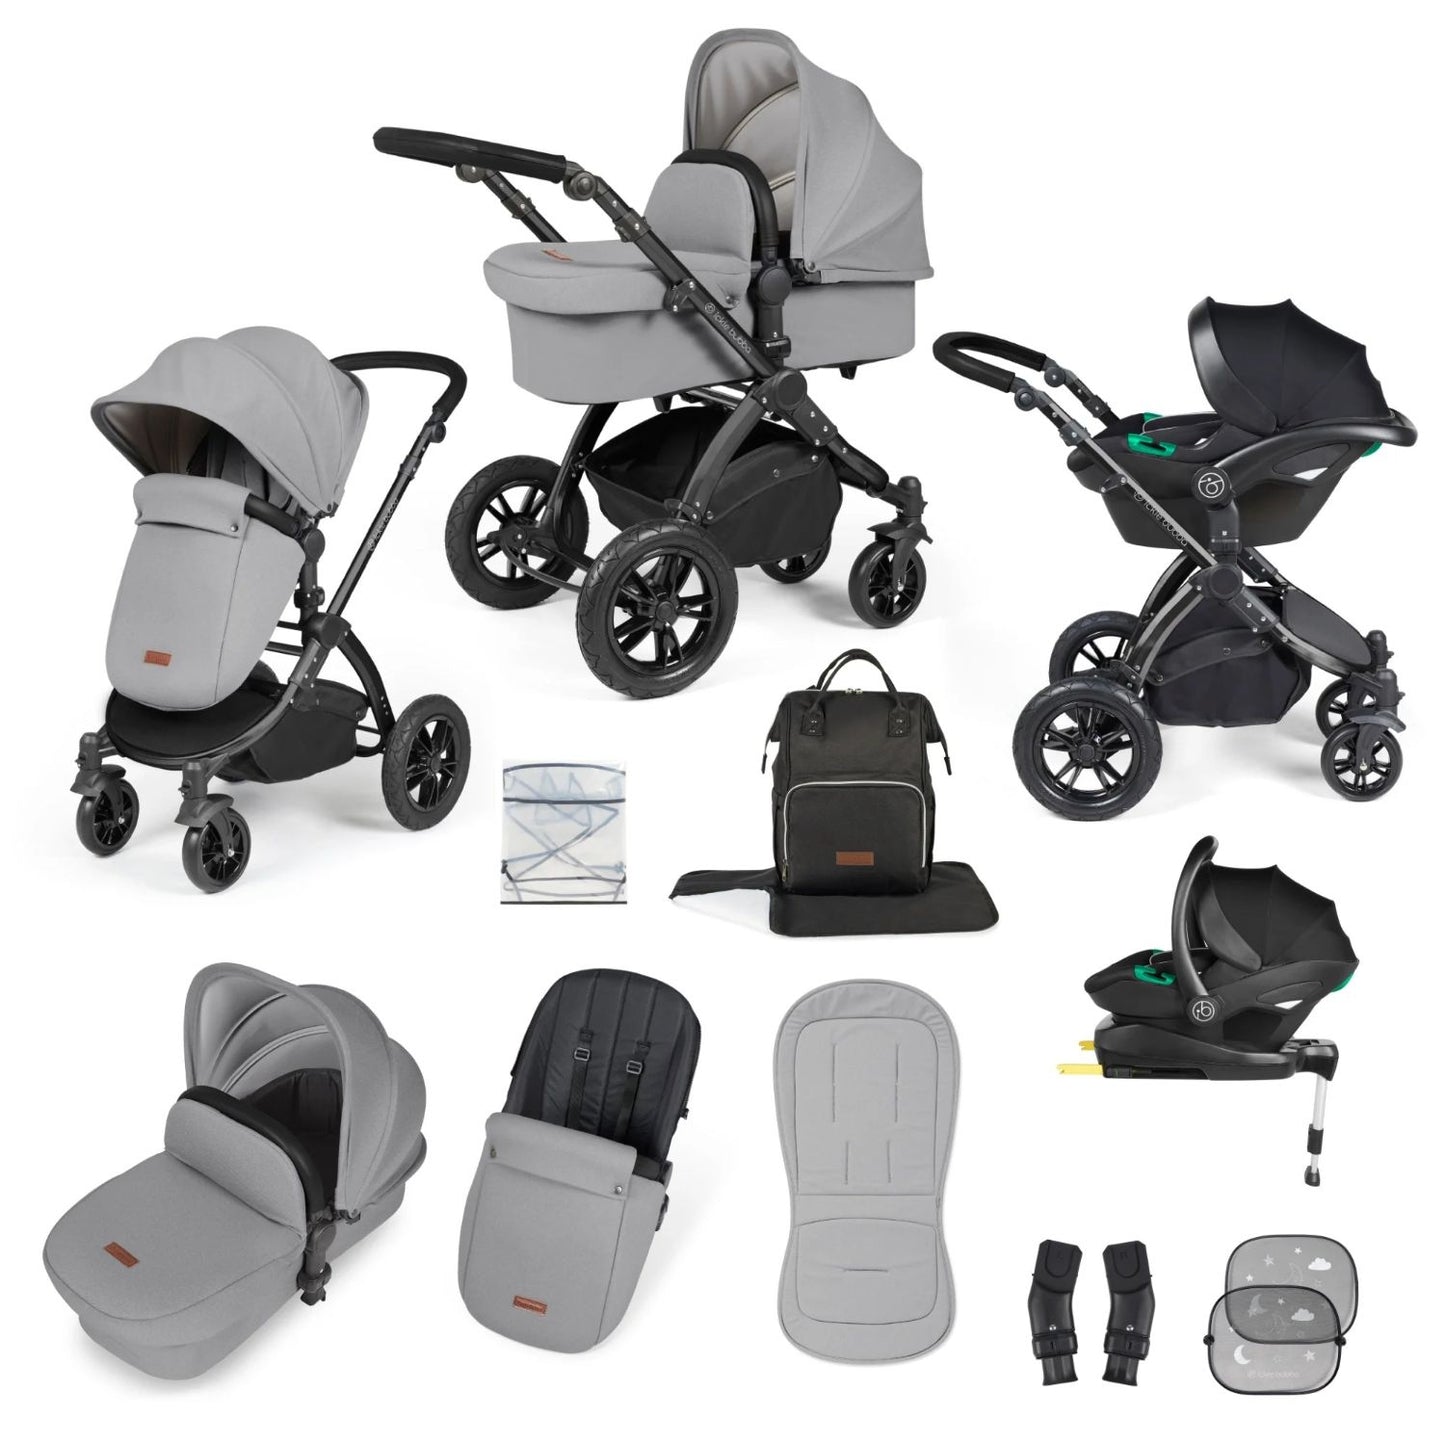 Ickle Bubba Stomp Luxe All-in-One Travel System with Stratus i-Size Car Seat and ISOFIX Base and accessories in Pearl Grey colour